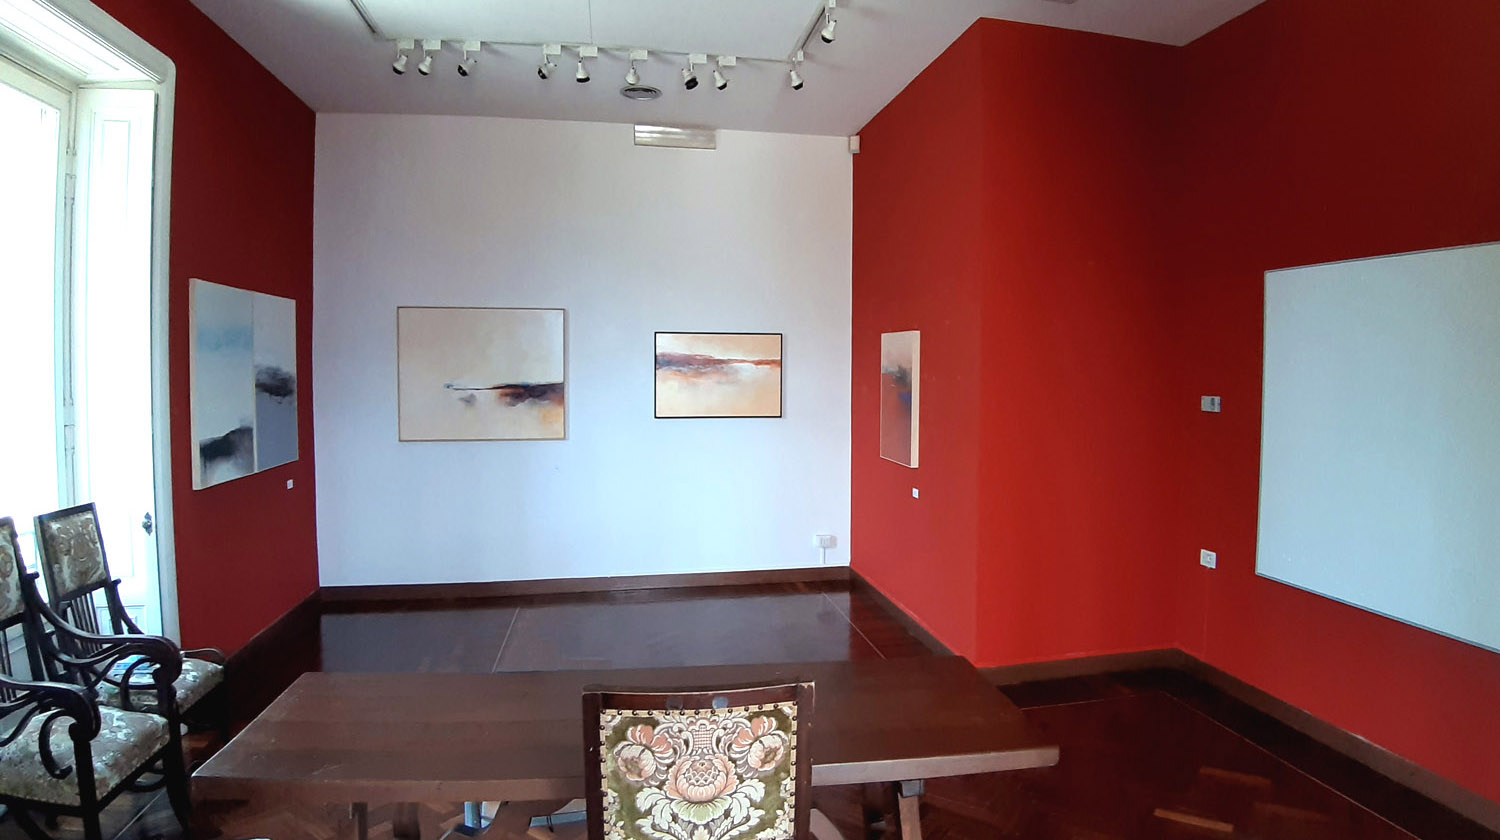 The exhibits of Sergio Aiello contemporary visual artist of Abstract Contemporary Landscape Paintings at https://www.sergioaiello.com